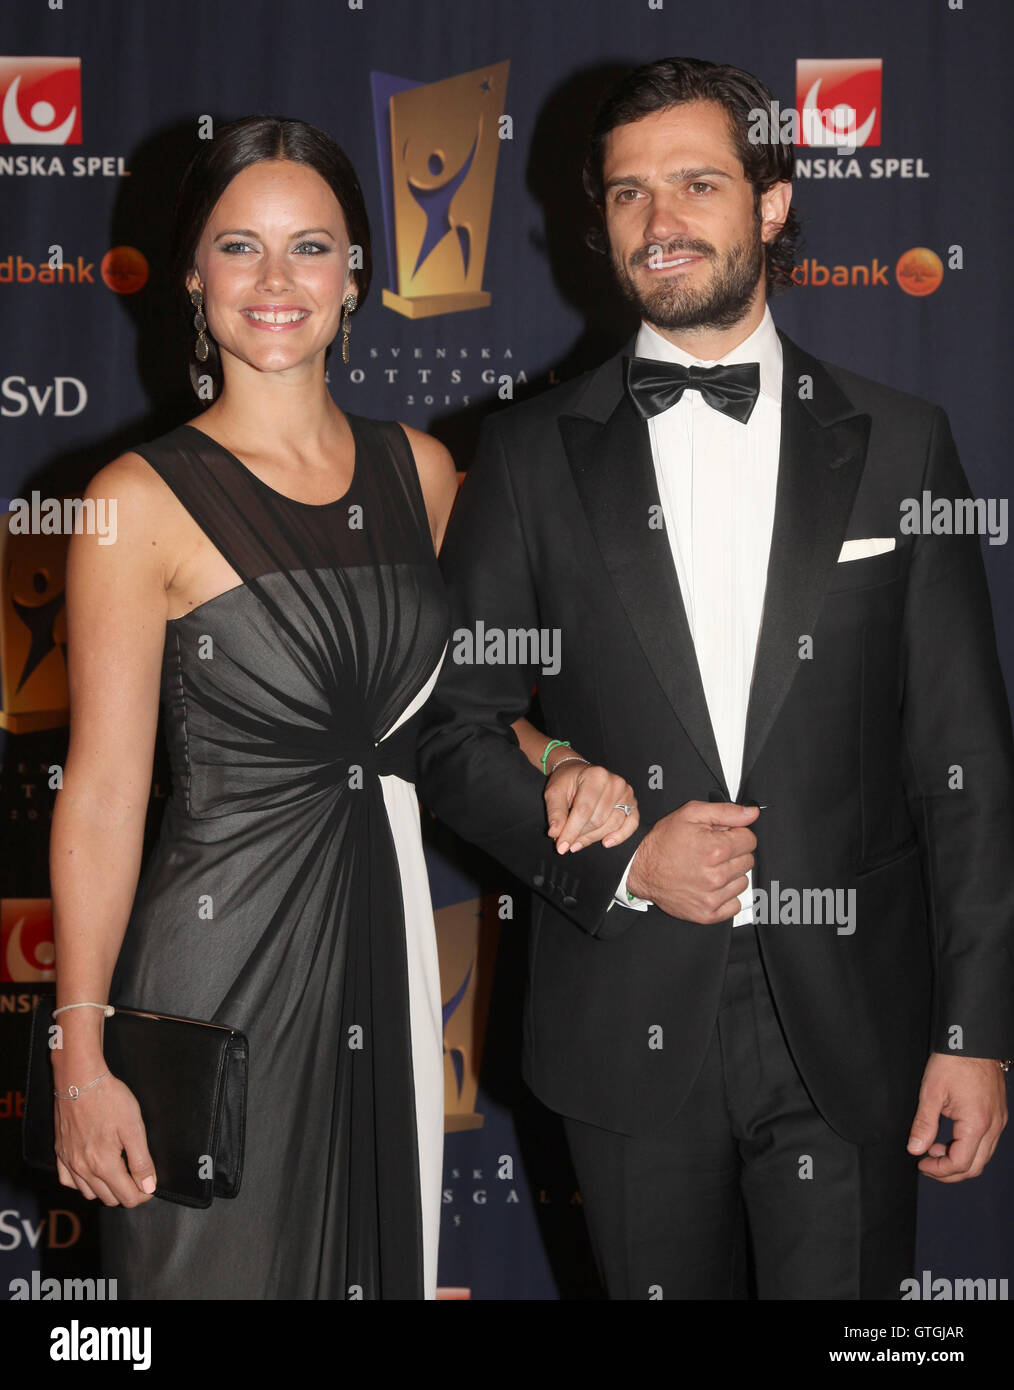 PRINCE CARL PHILIP with wife Sofia at Sweden annual sports gala 2015 Stock Photo